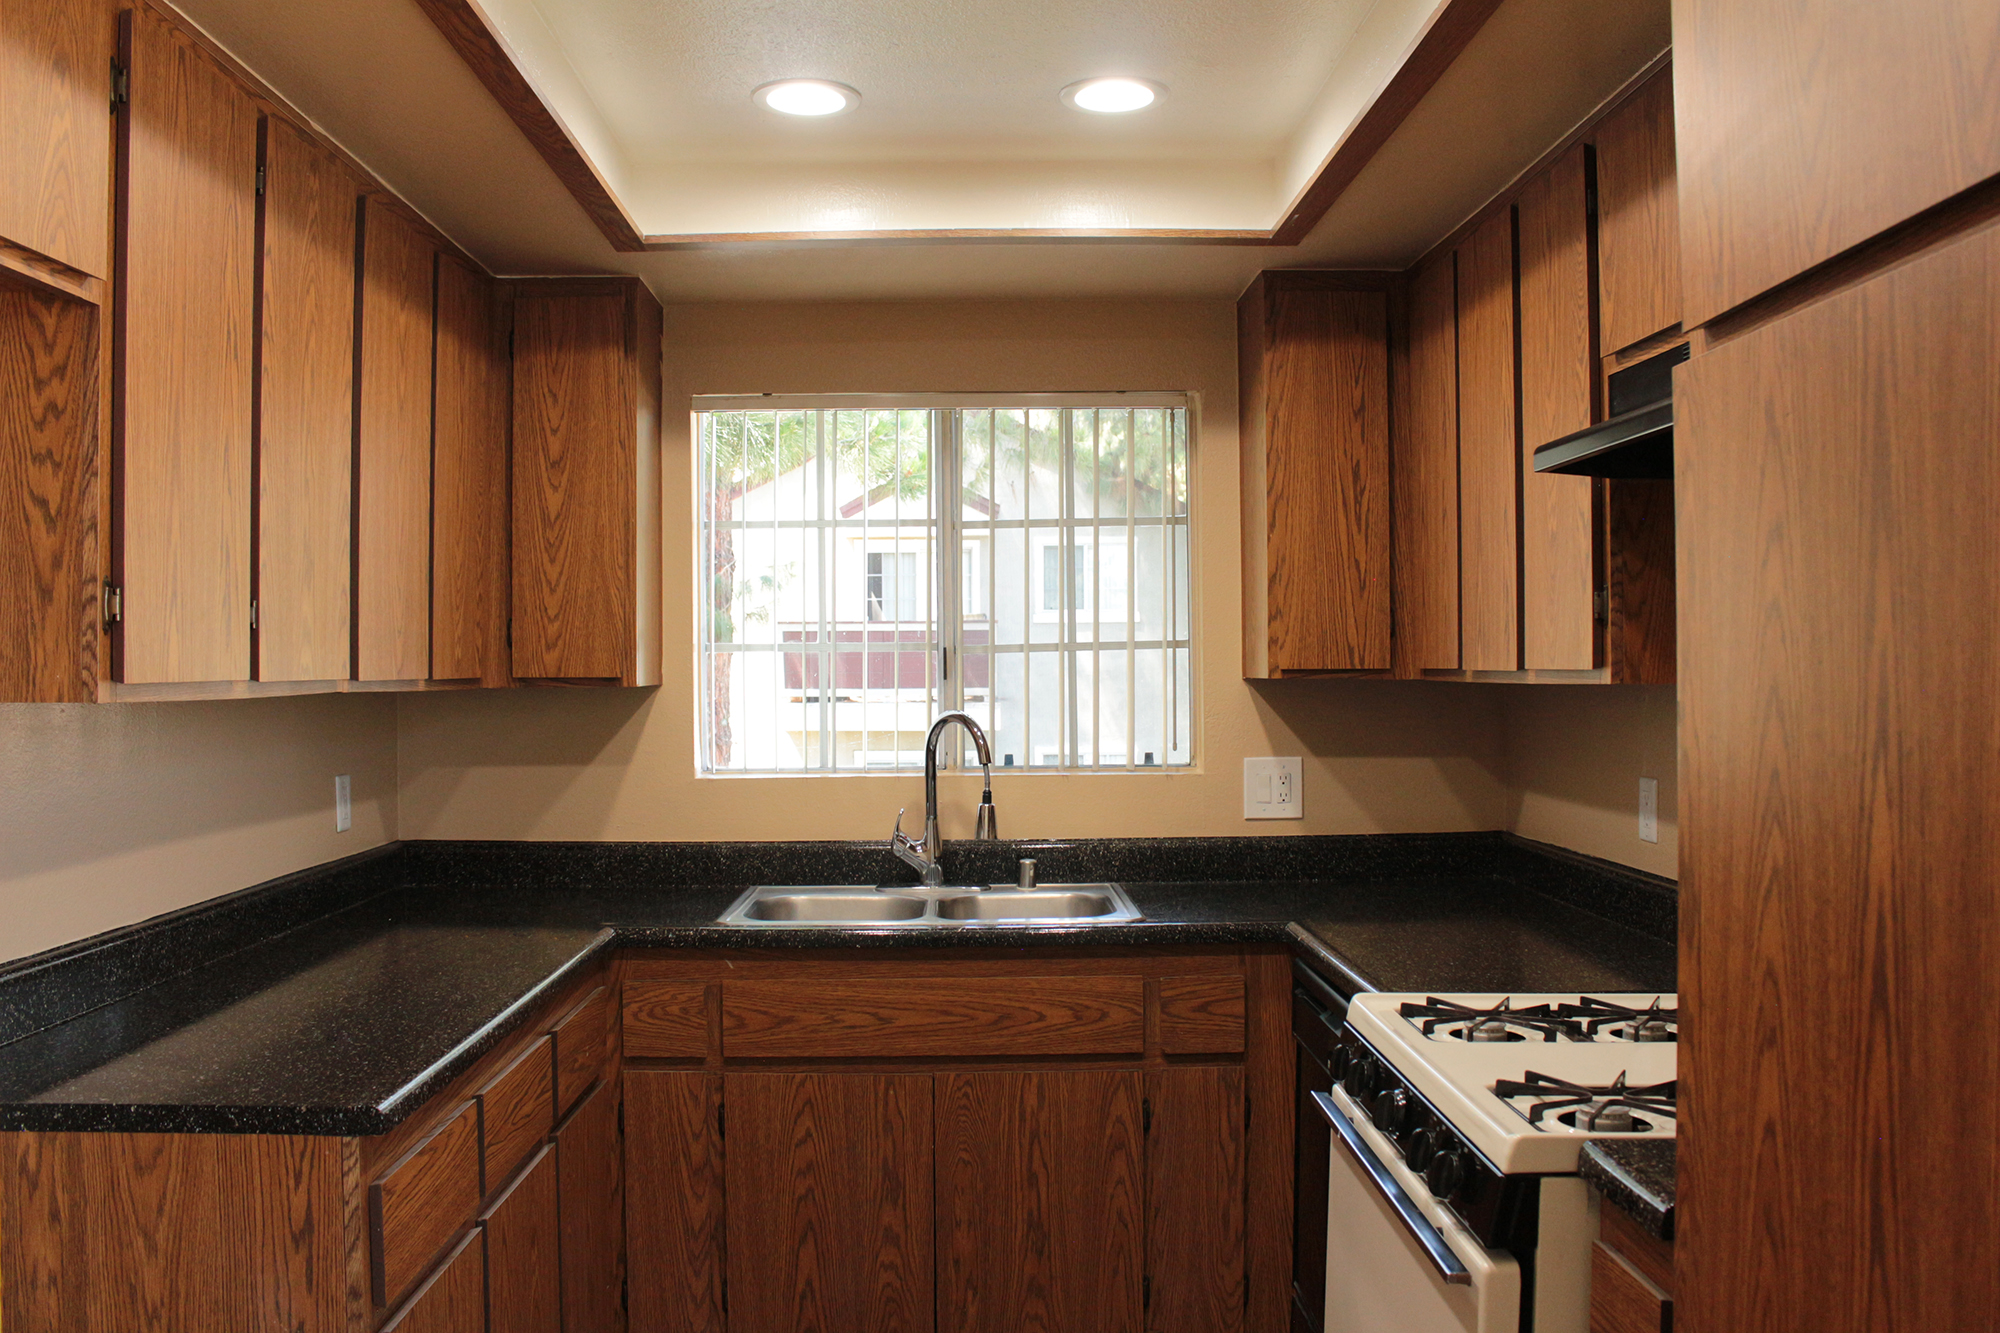 Take a tour today and see the gourmet kitchens  for yourself at the The Northwoods Apartments.